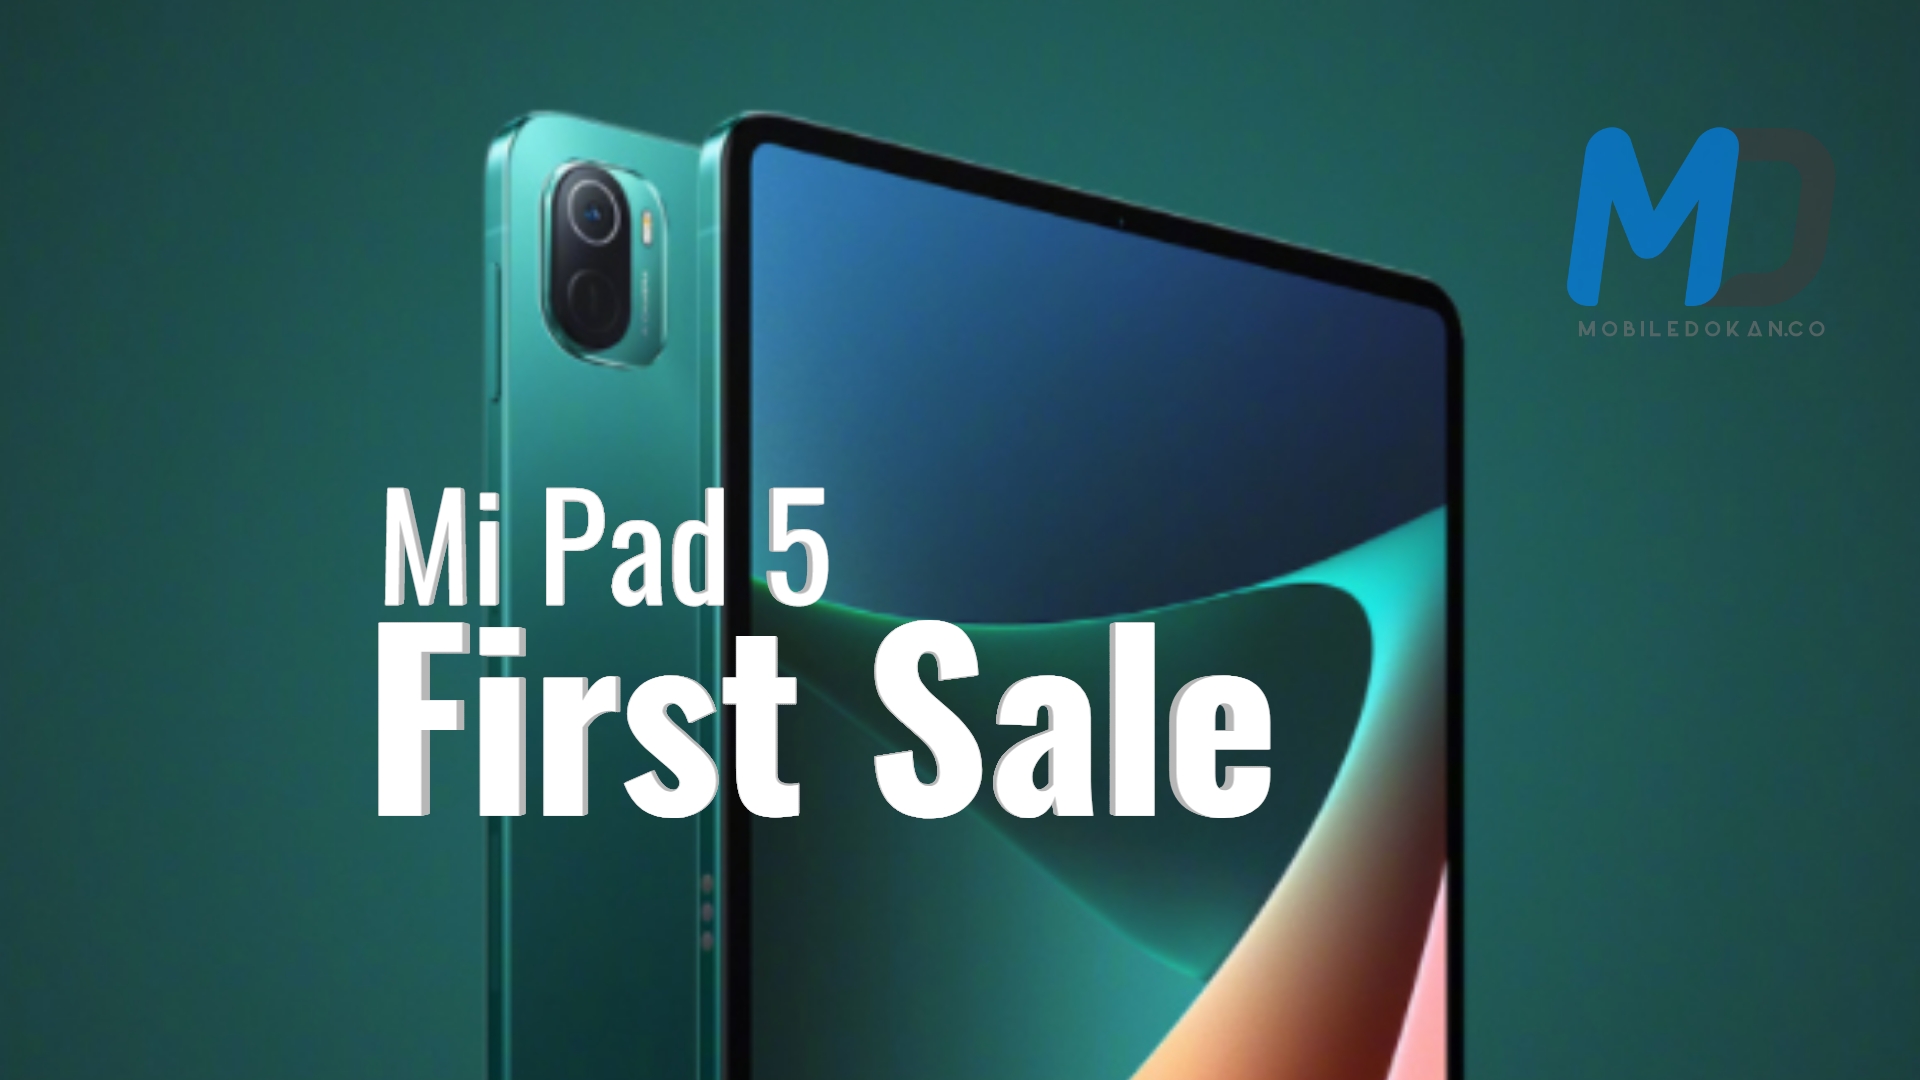 Xiaomi sold 200,000 units of Mi Pad 5 series within 5 minutes